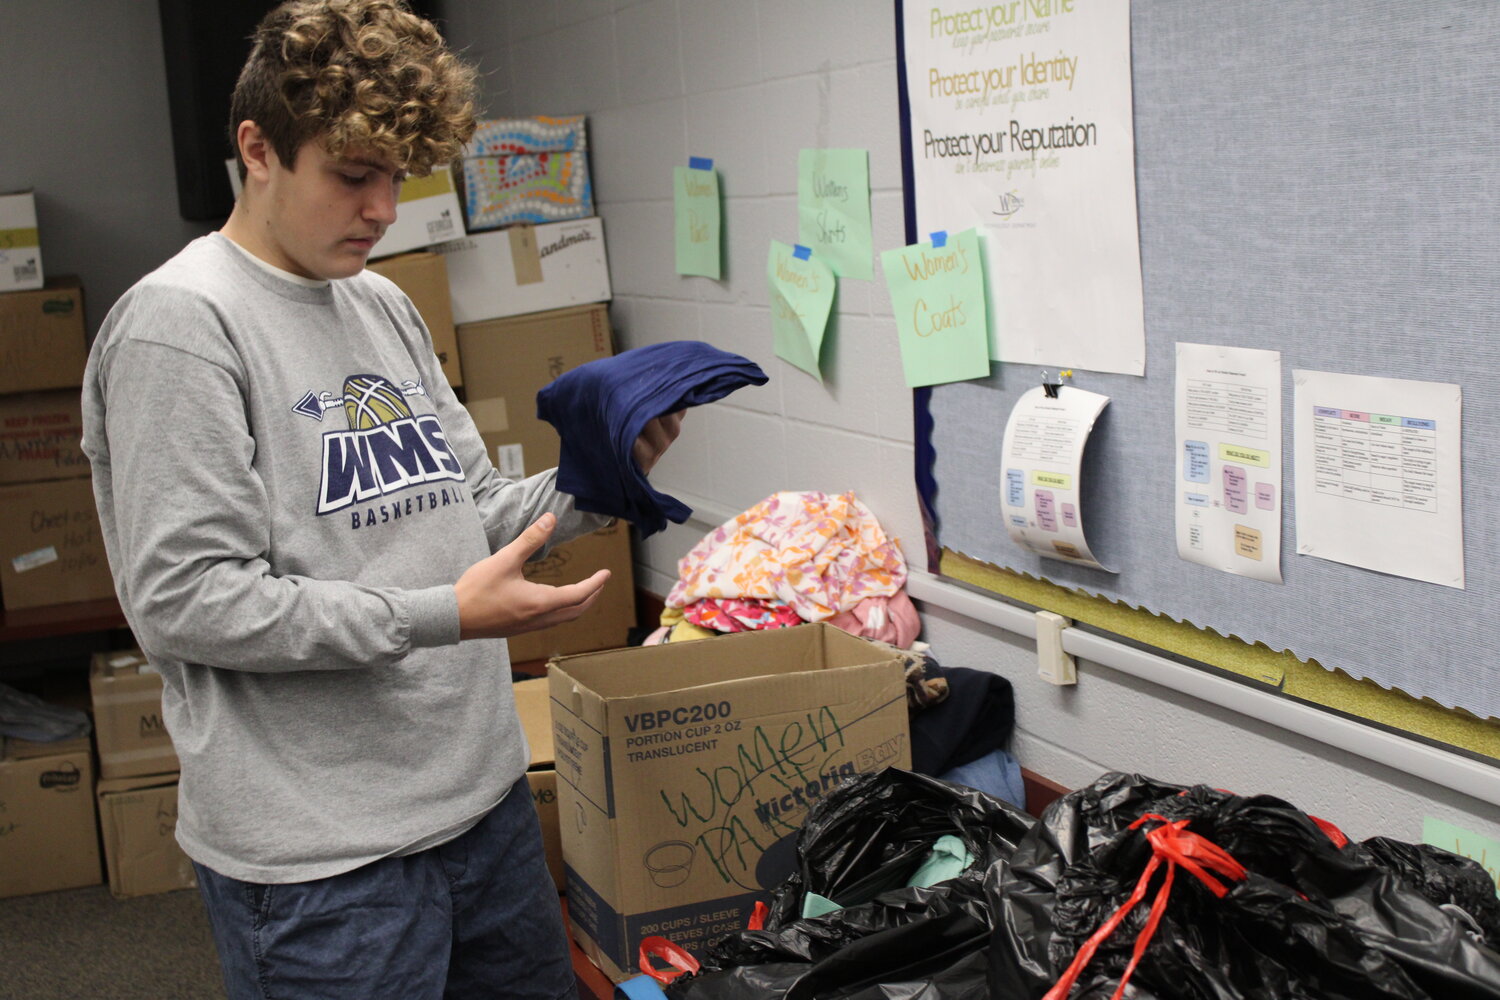 Logan Van Scoy inspects some of the donated items.